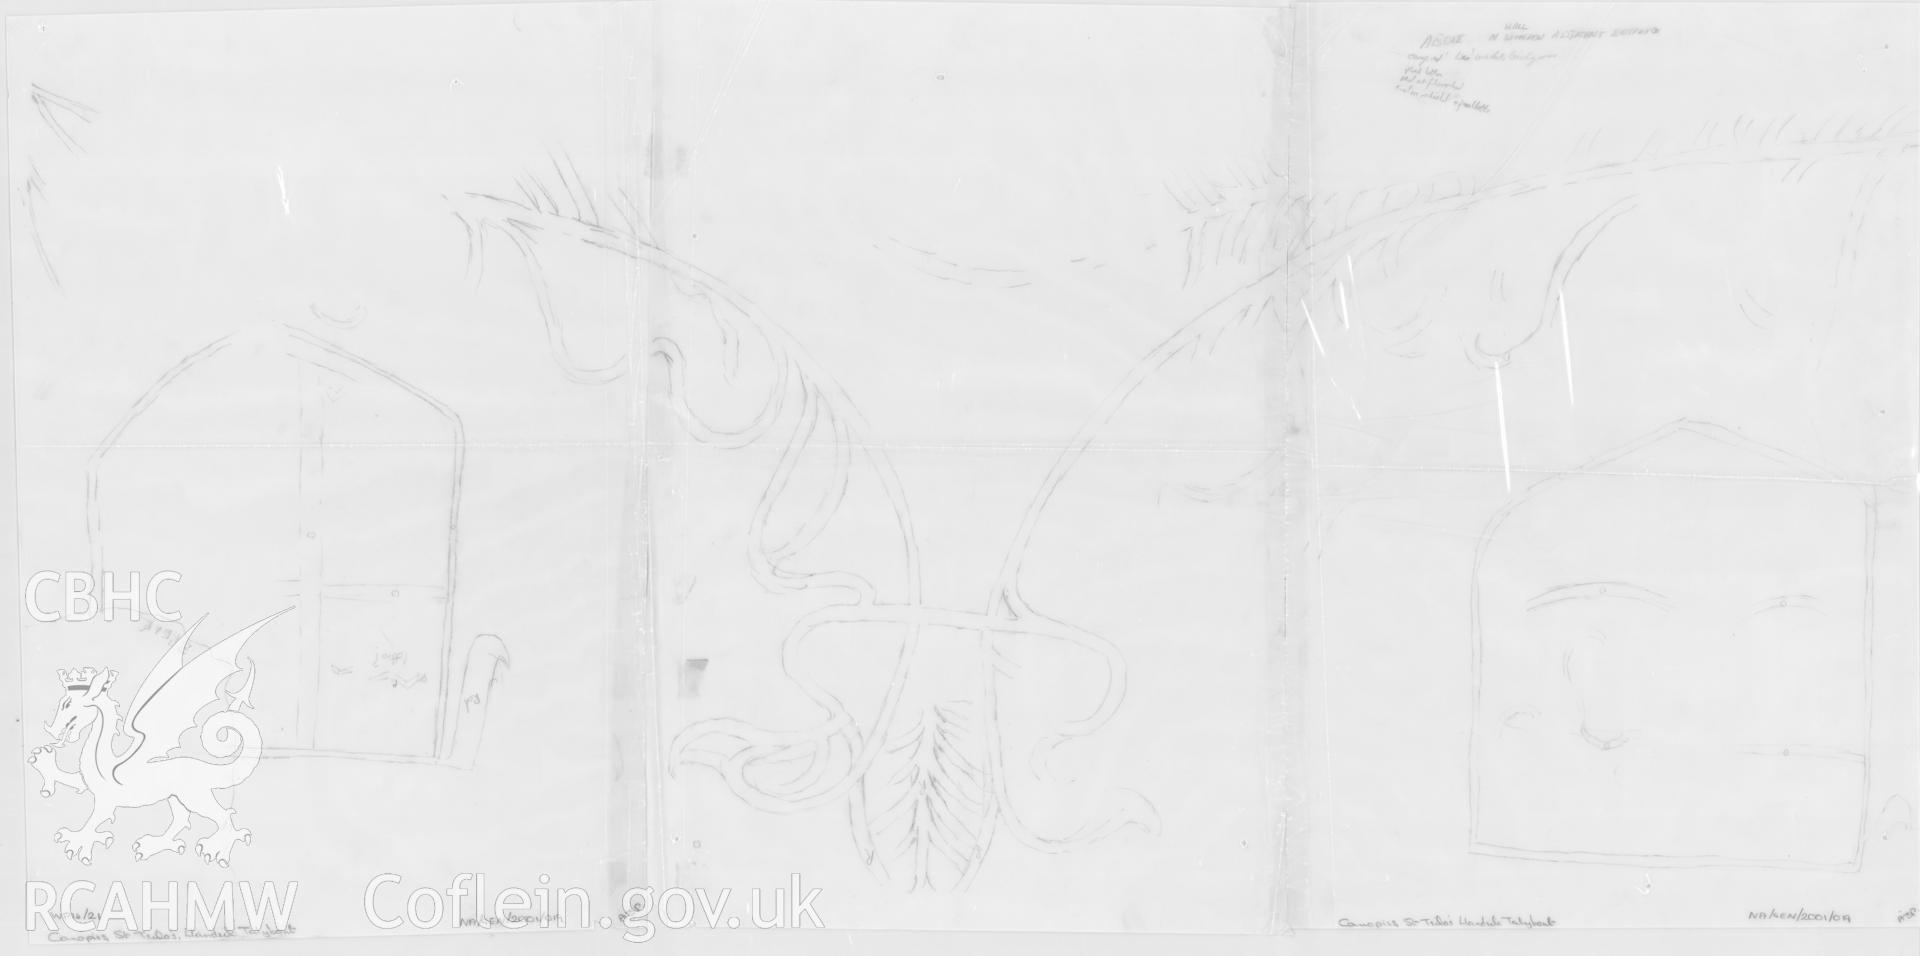 Provisional drawing on tracing paper showing the wall painting of canopies above the window of the north wall in St Teilo's Church, Llandeilo Talybont, produced by A.J. Parkinson, undated.